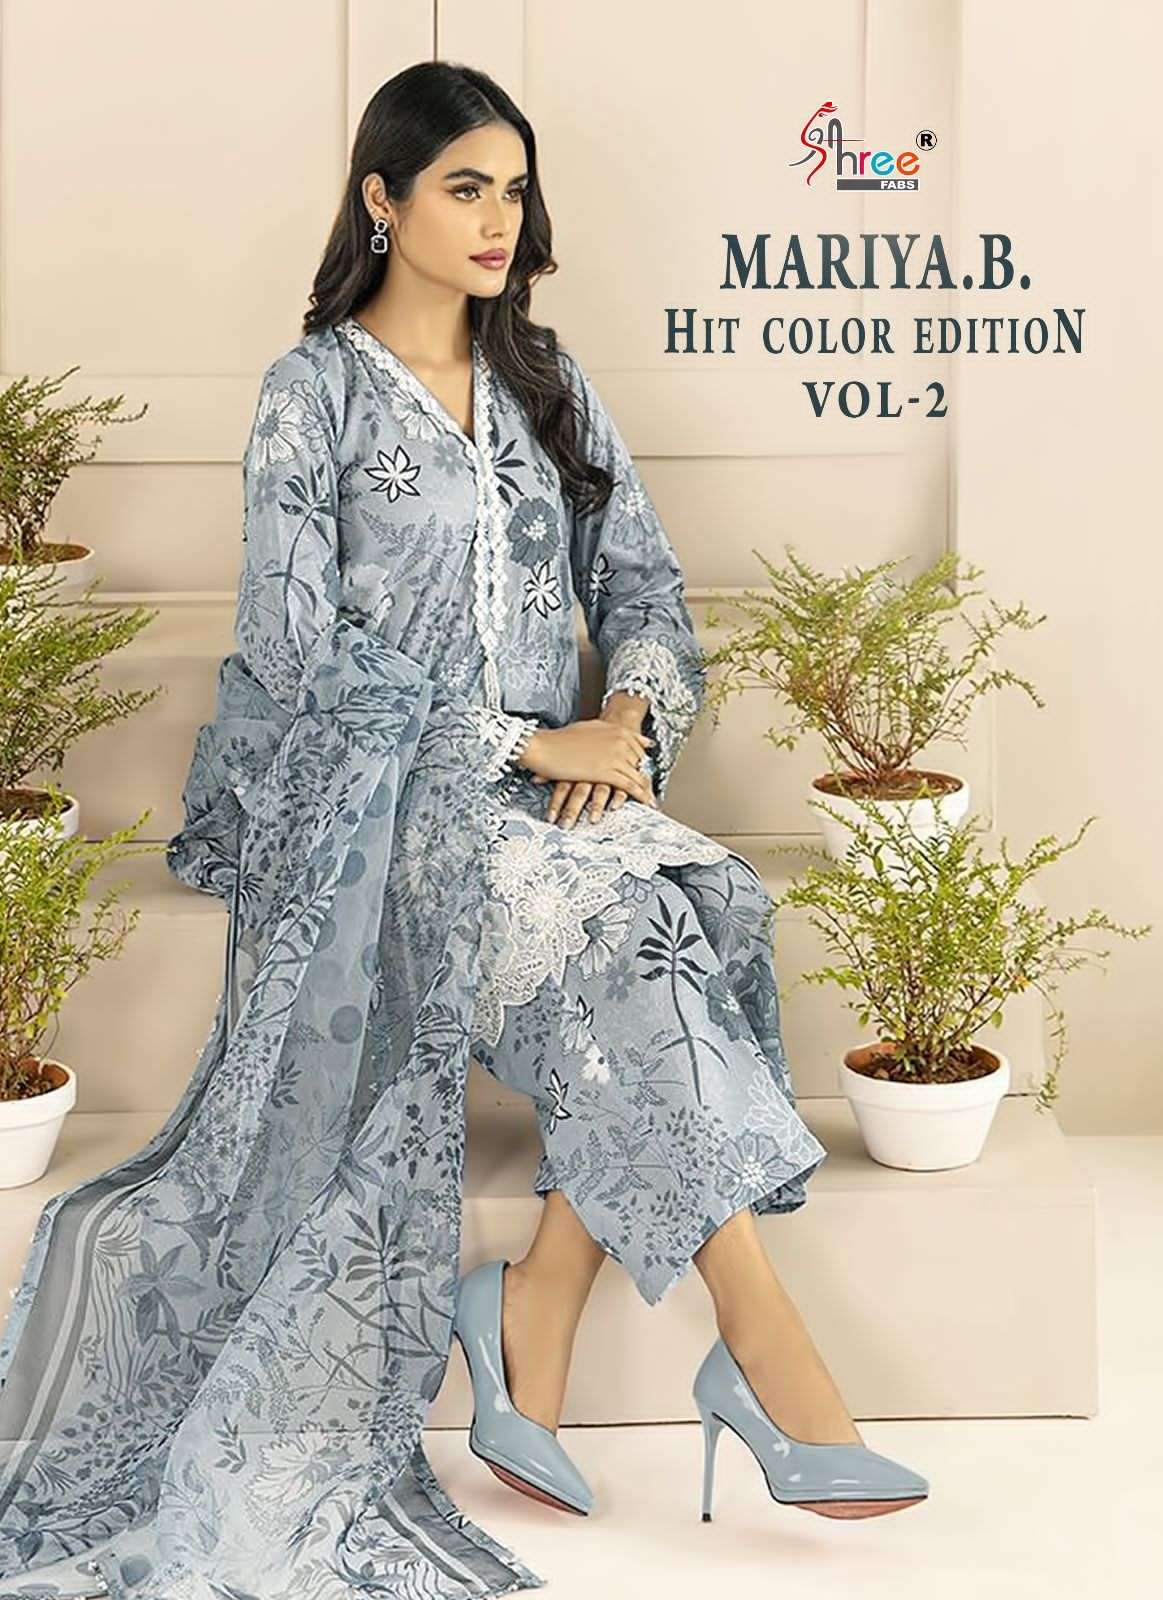 Shree Fabs Maria B Hit Color Edition Vol 2 Cotton With Print...